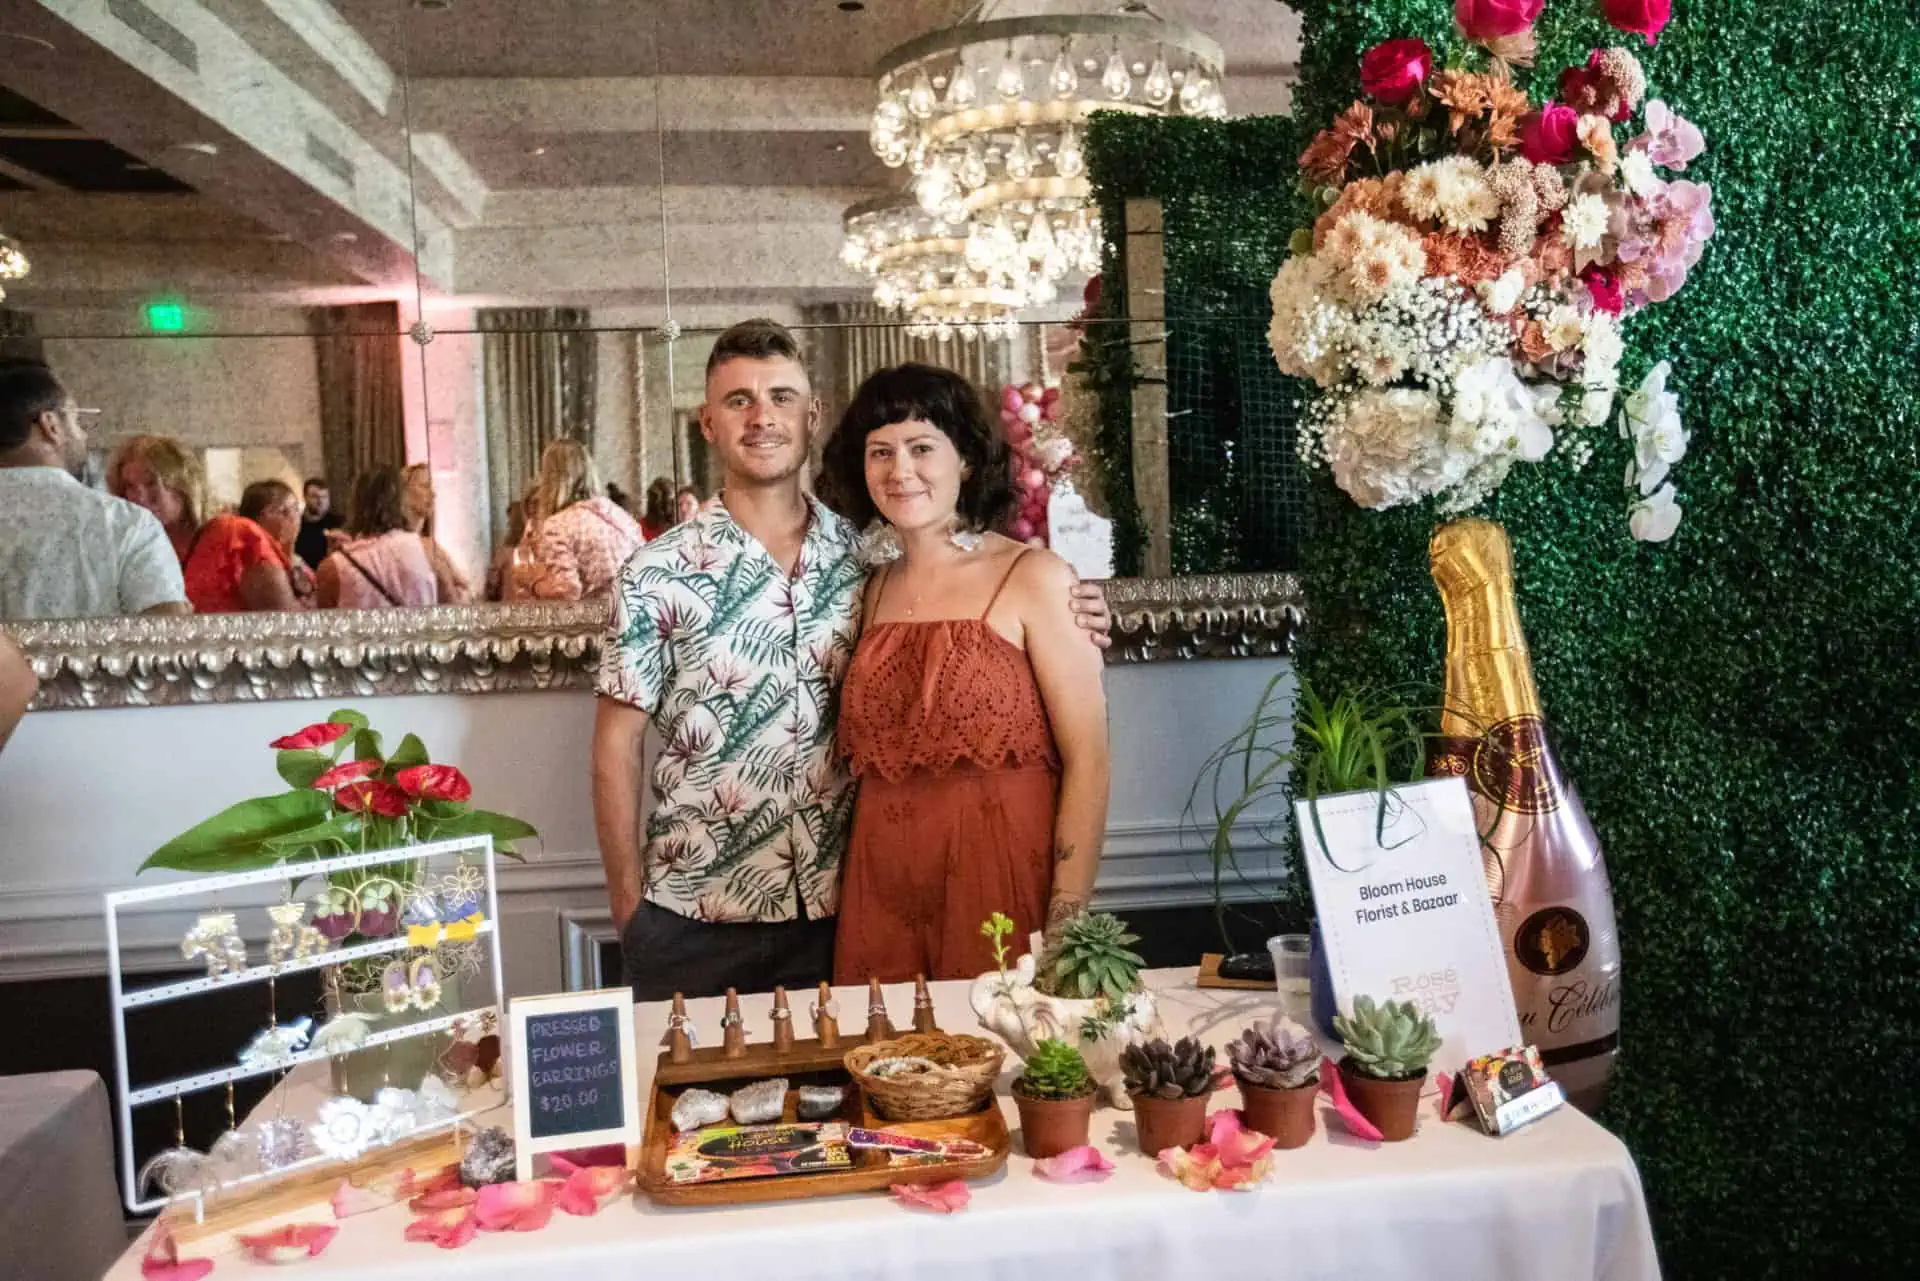 the owners of bloom house and florist bazaar smile while standing behind their table